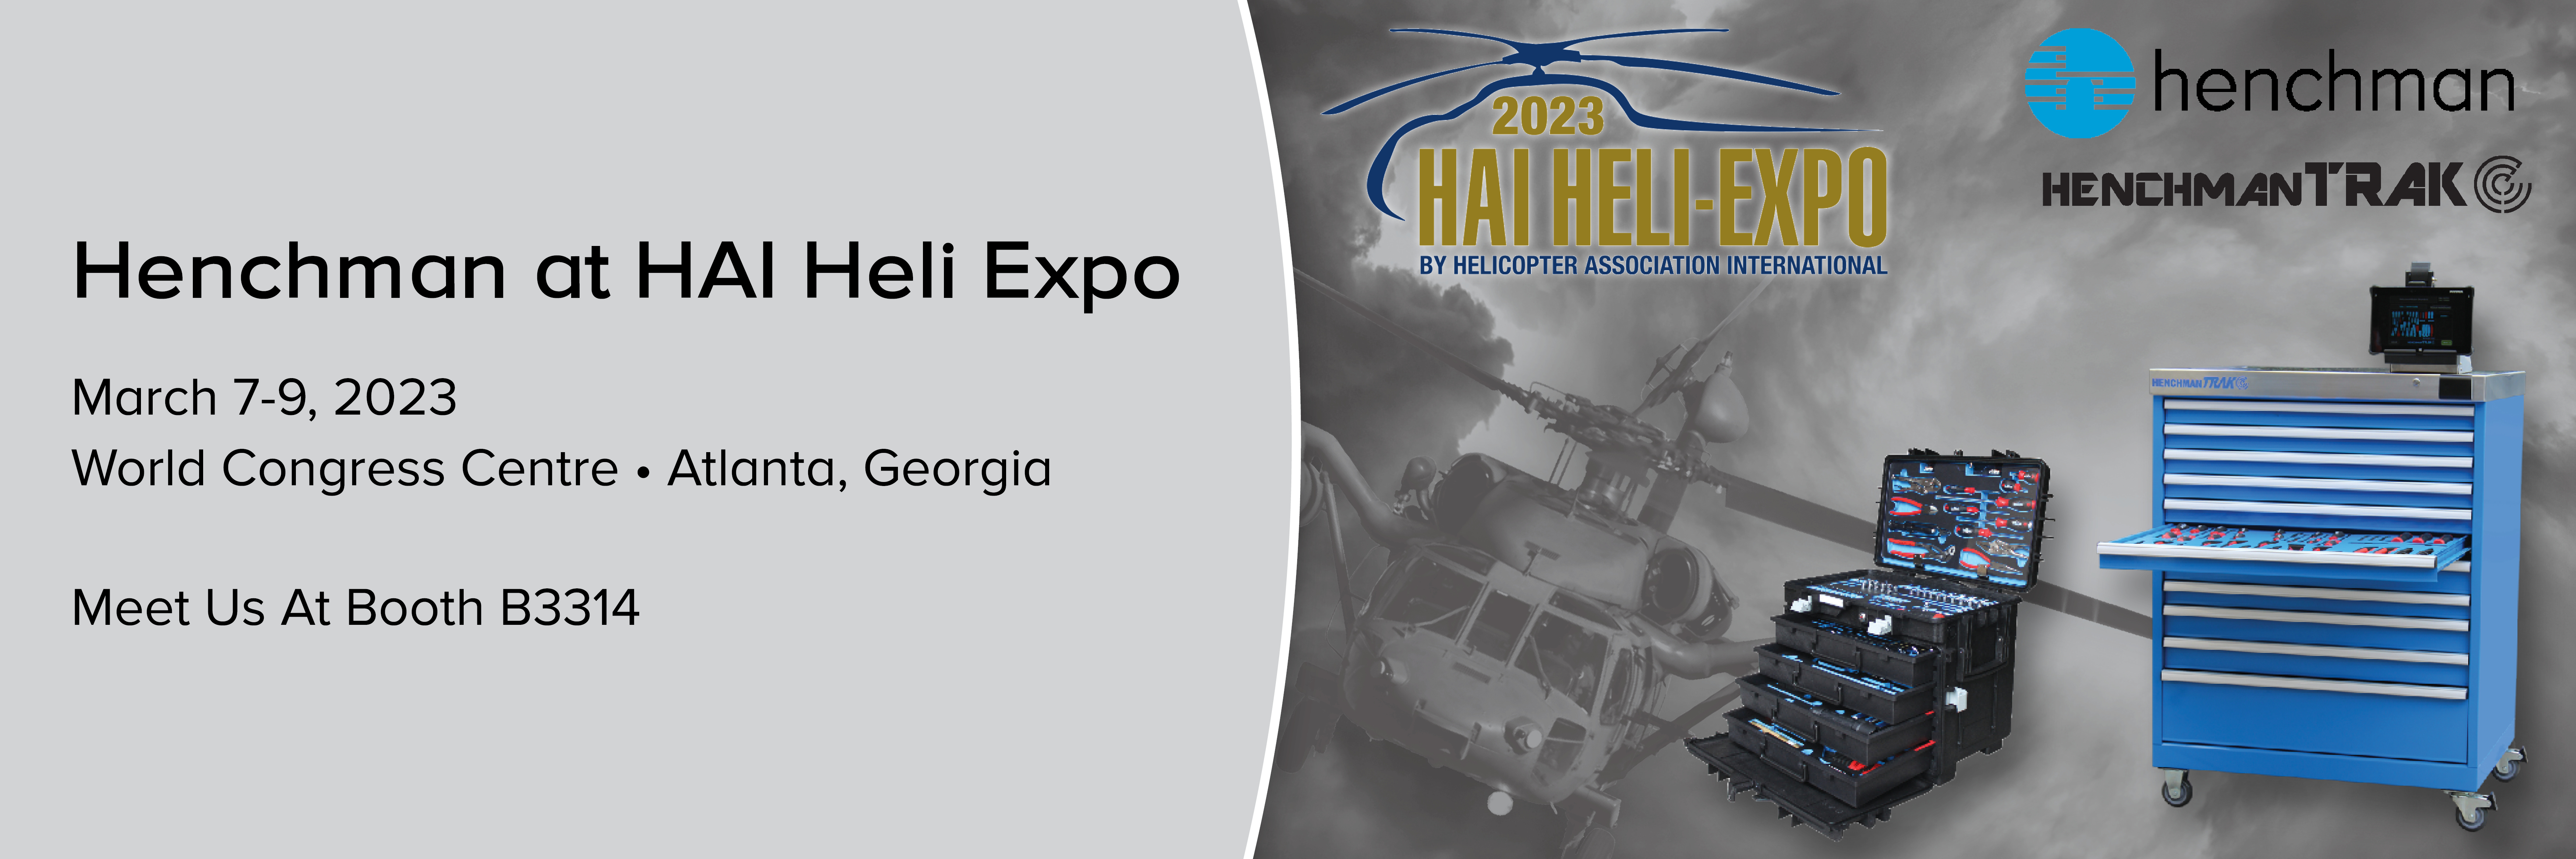 HAI Heli-Expo 2022 in Dallas Texas with Henchman on Booth 6423